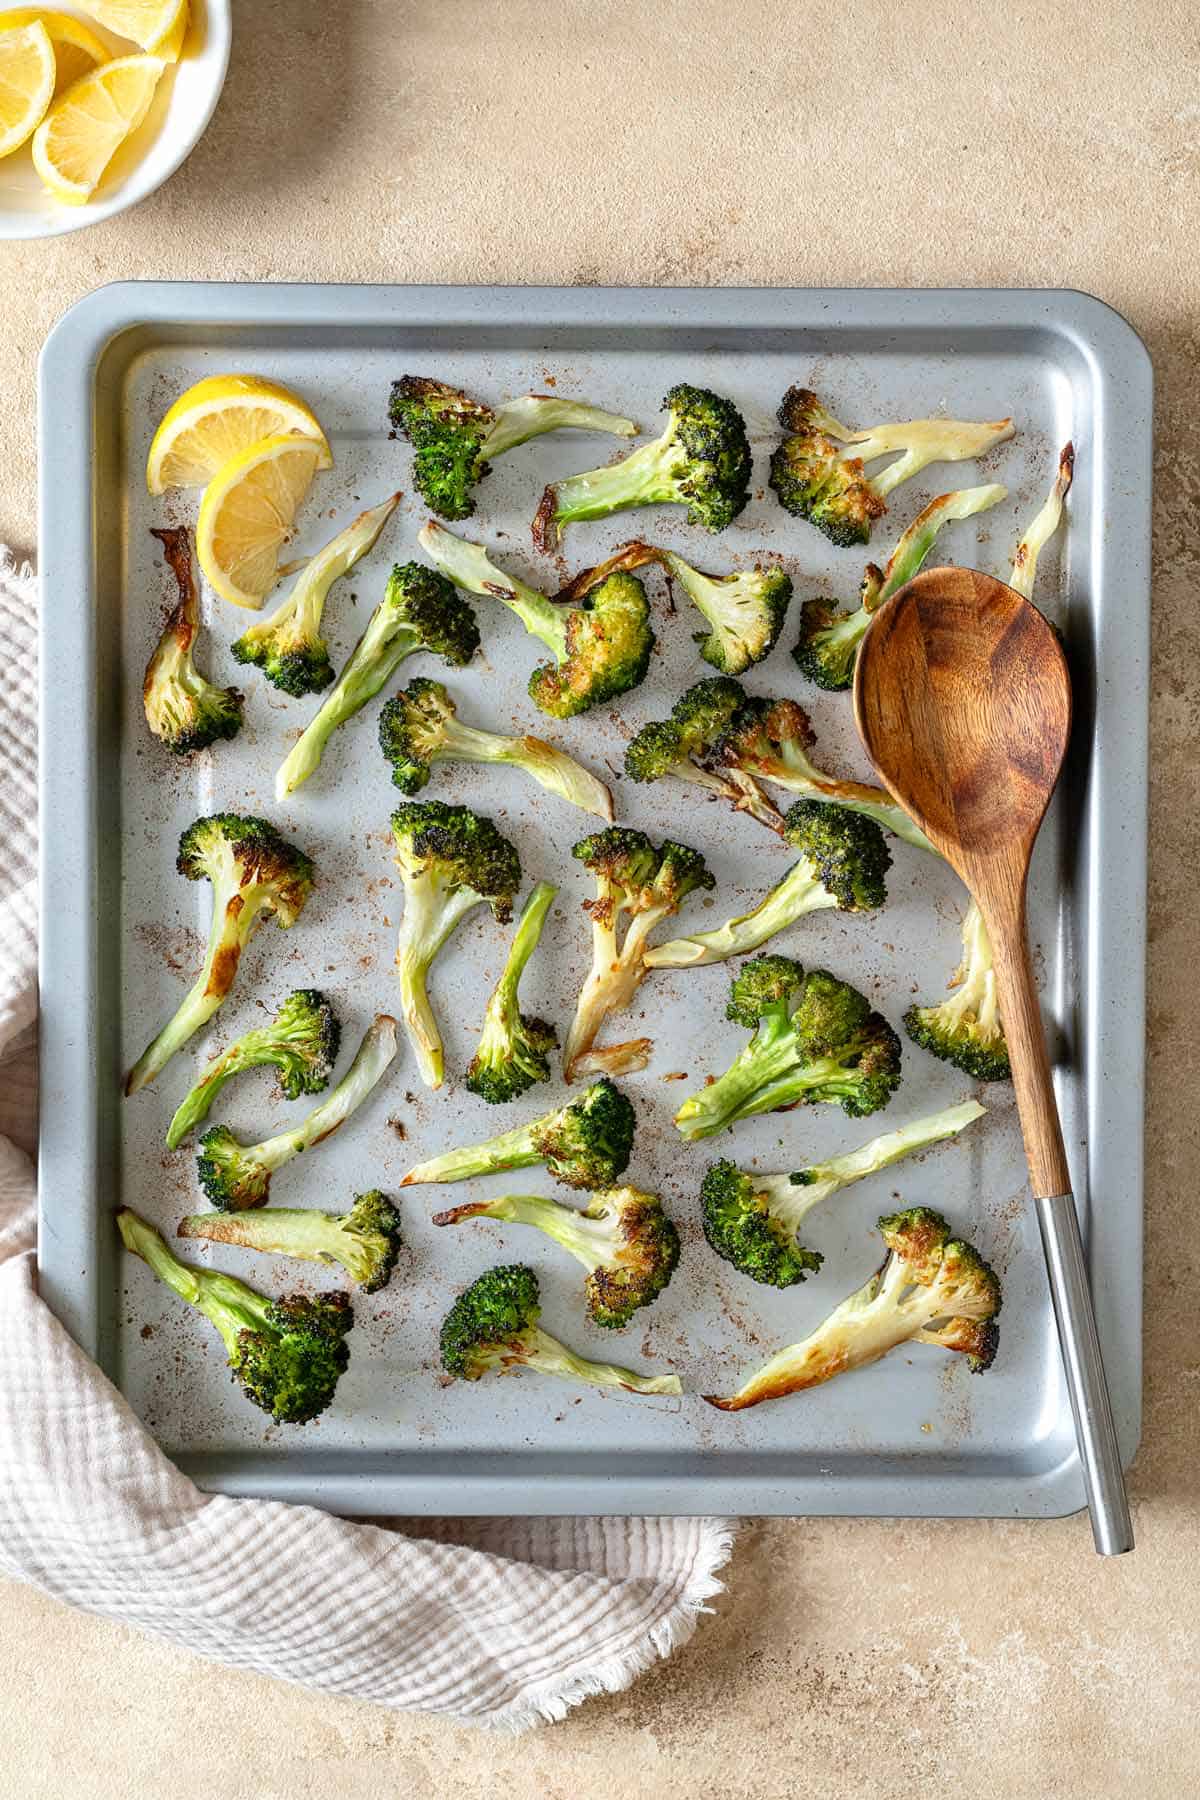 Pieces of roasted broccoli on a sheet pan with 2 lemon wedges and a wooden spoon next to a bowl of lemon wedges.